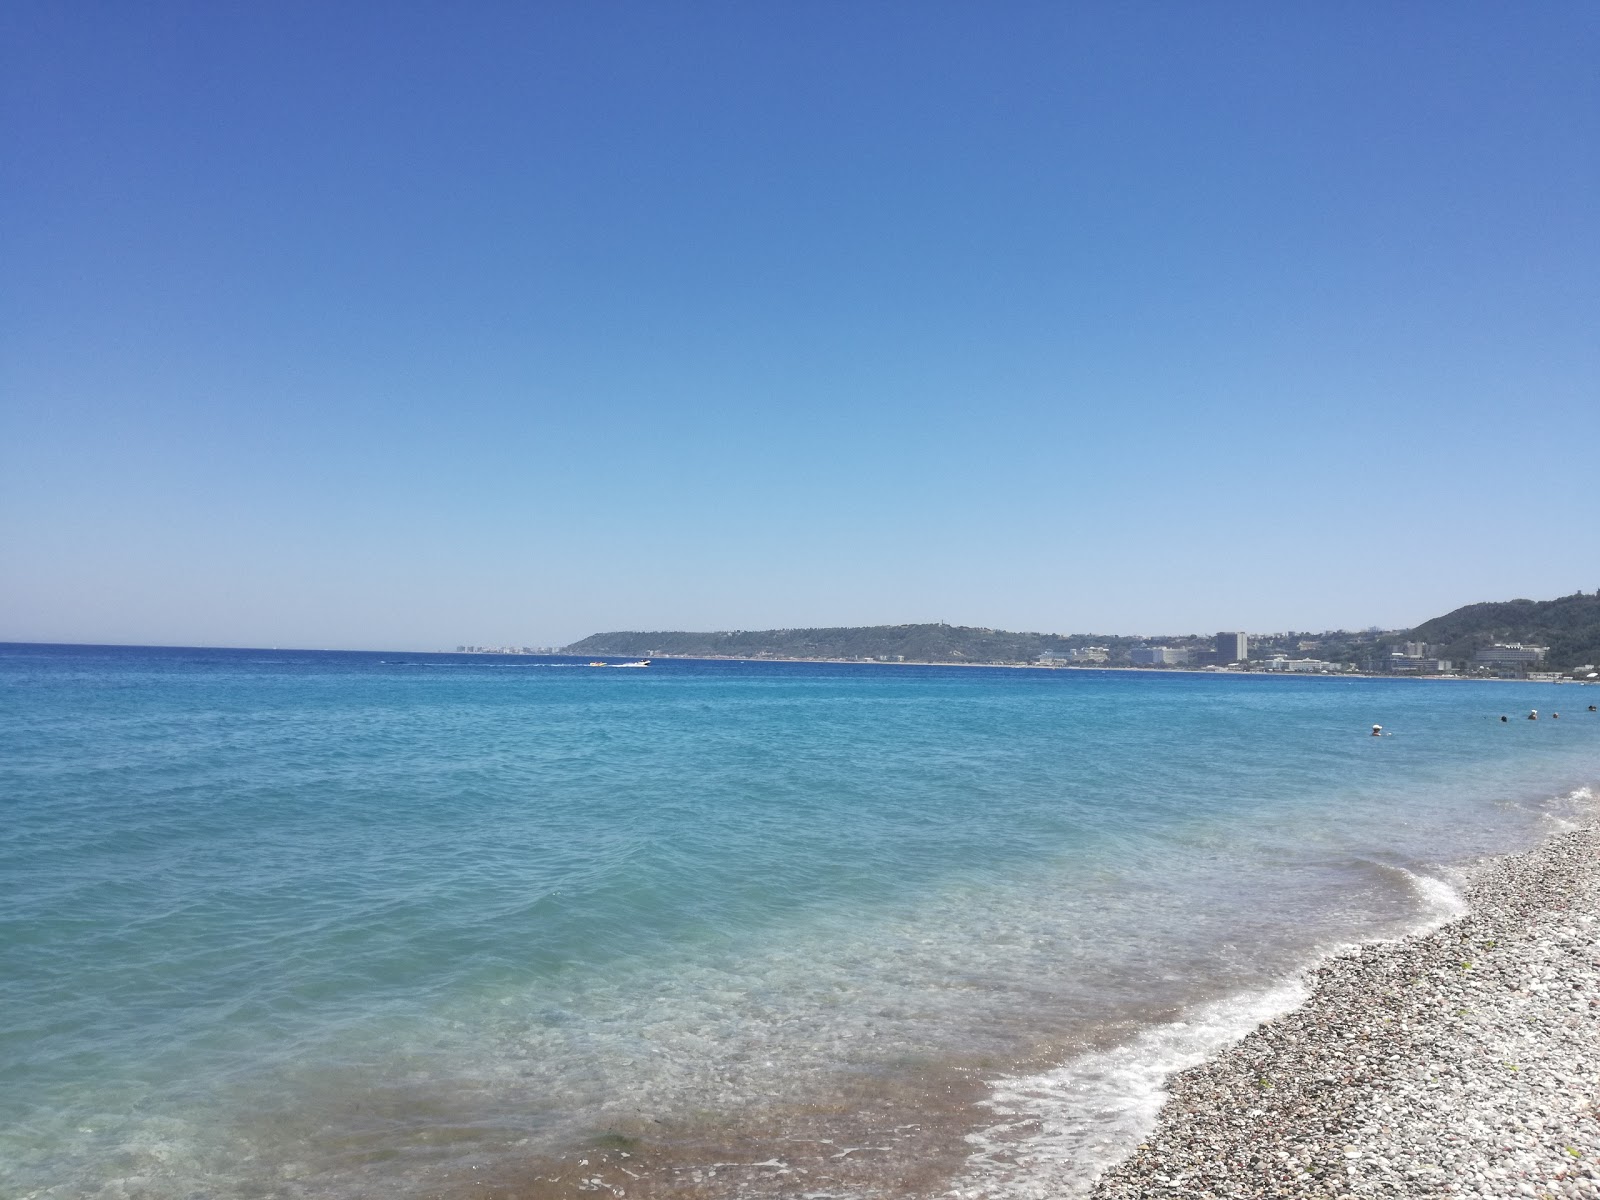 Photo of Ialysos Bay Beach and the settlement